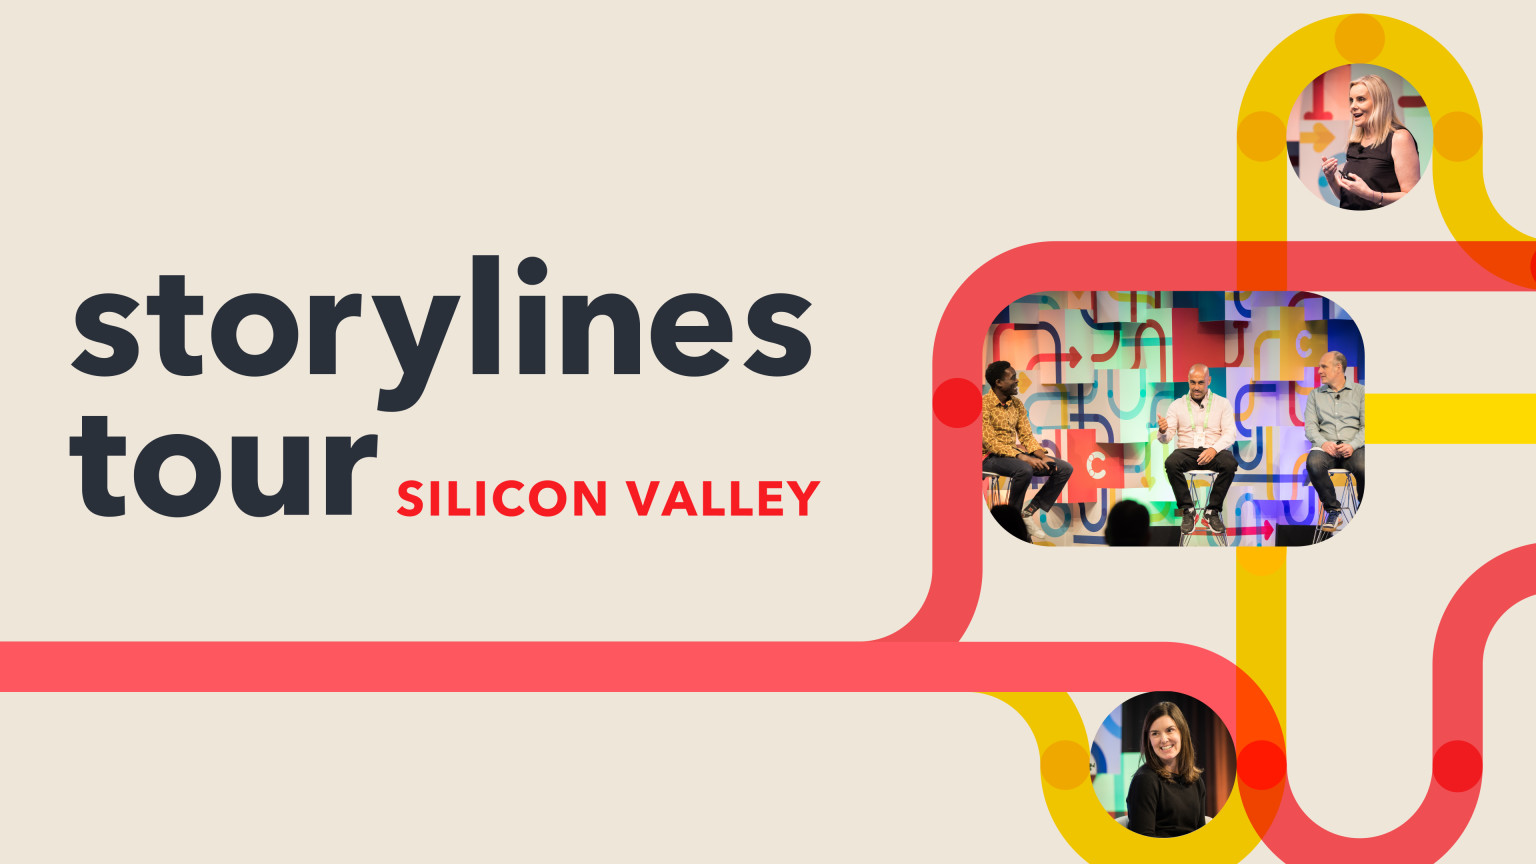 The Storylines Tour landed in Silicon Valley, where attendees shared their insights on brand storytelling and new ways for technology to enhance creativity.